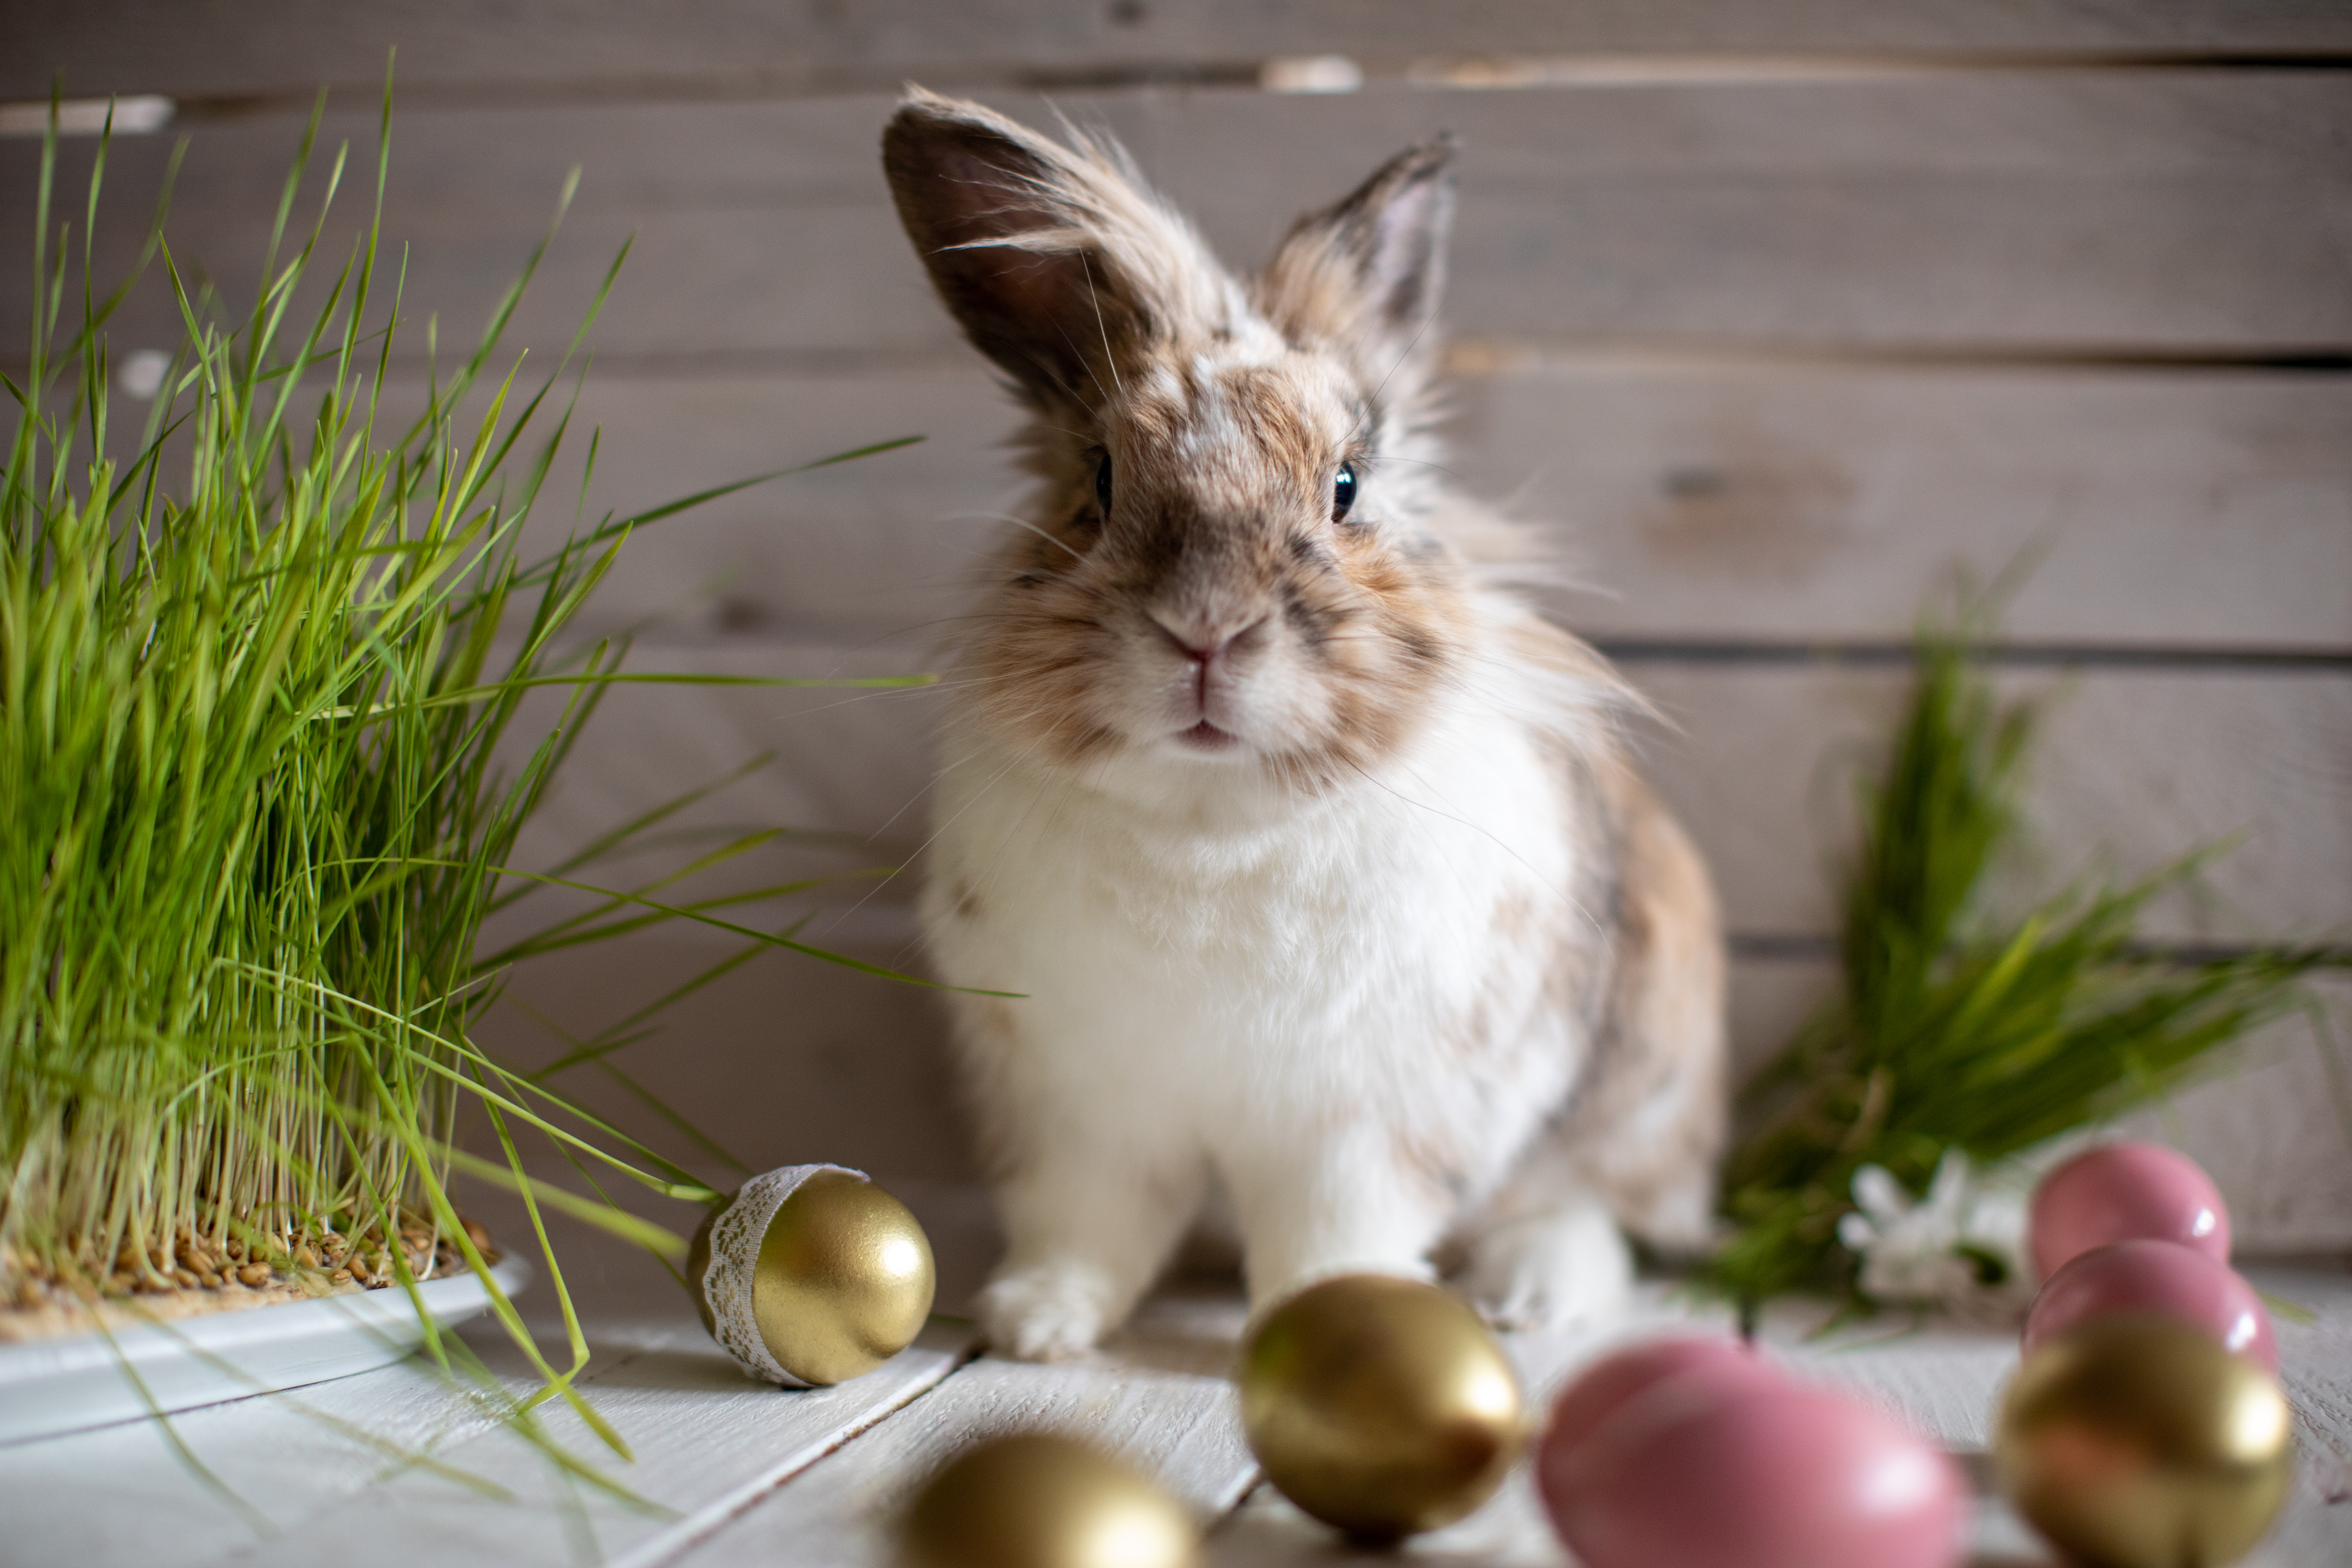 Fluffy bunny in front of wood panel, with Easter eggs scattered on the floor